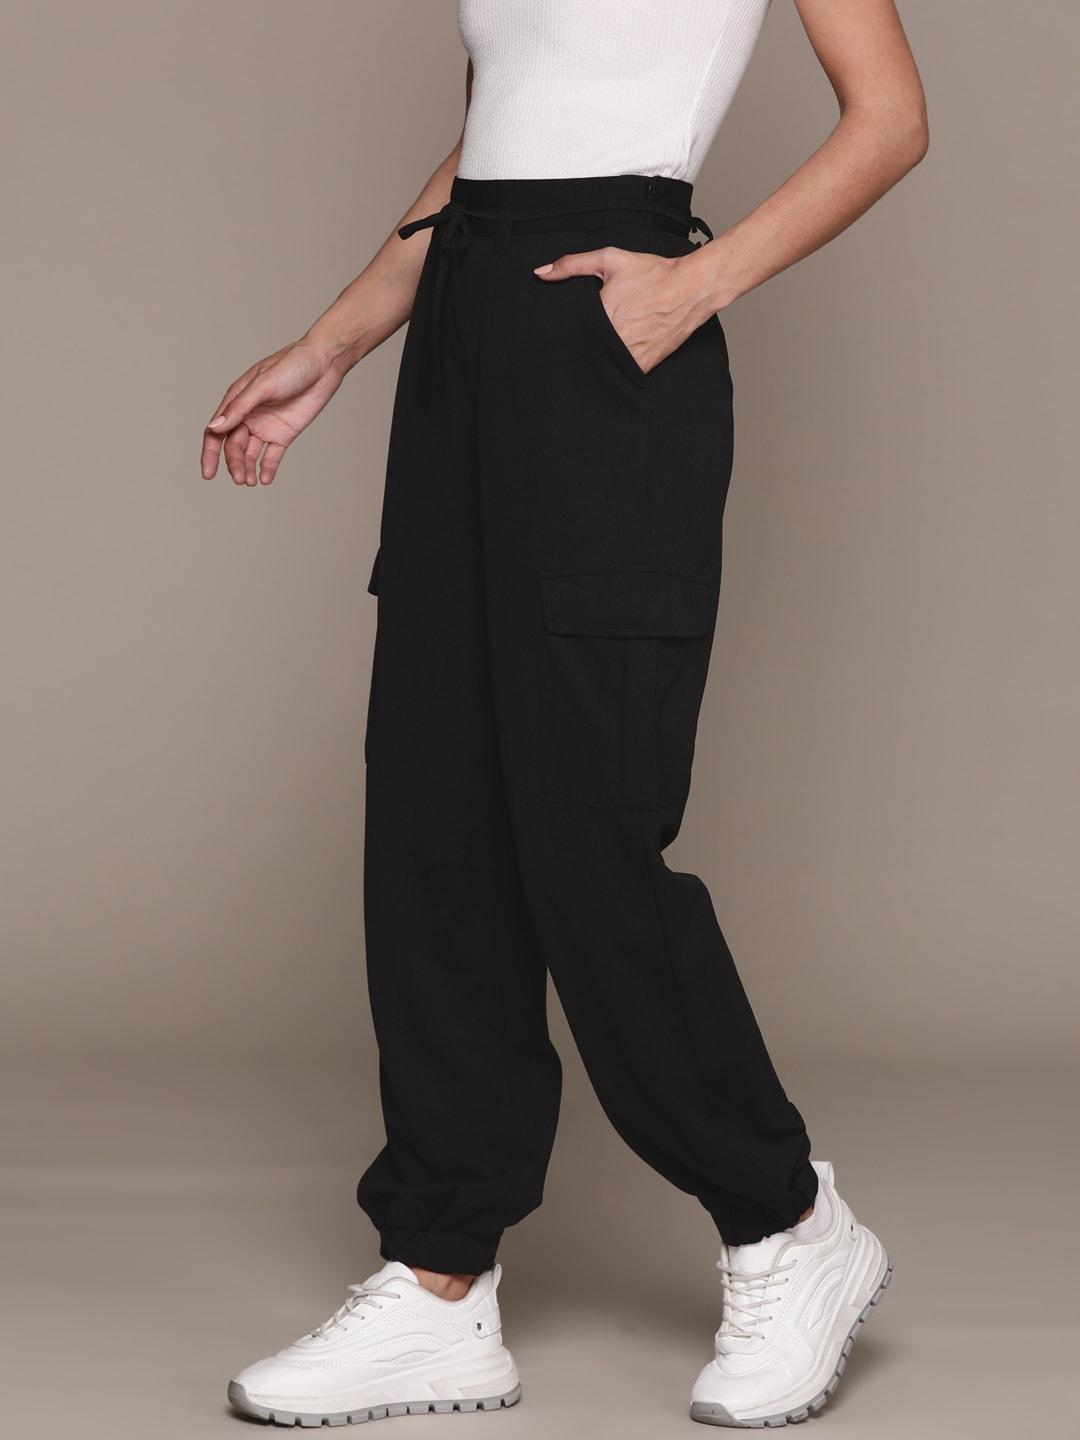 the-roadster-lifestyle-co.-women-pleated-cargos-joggers